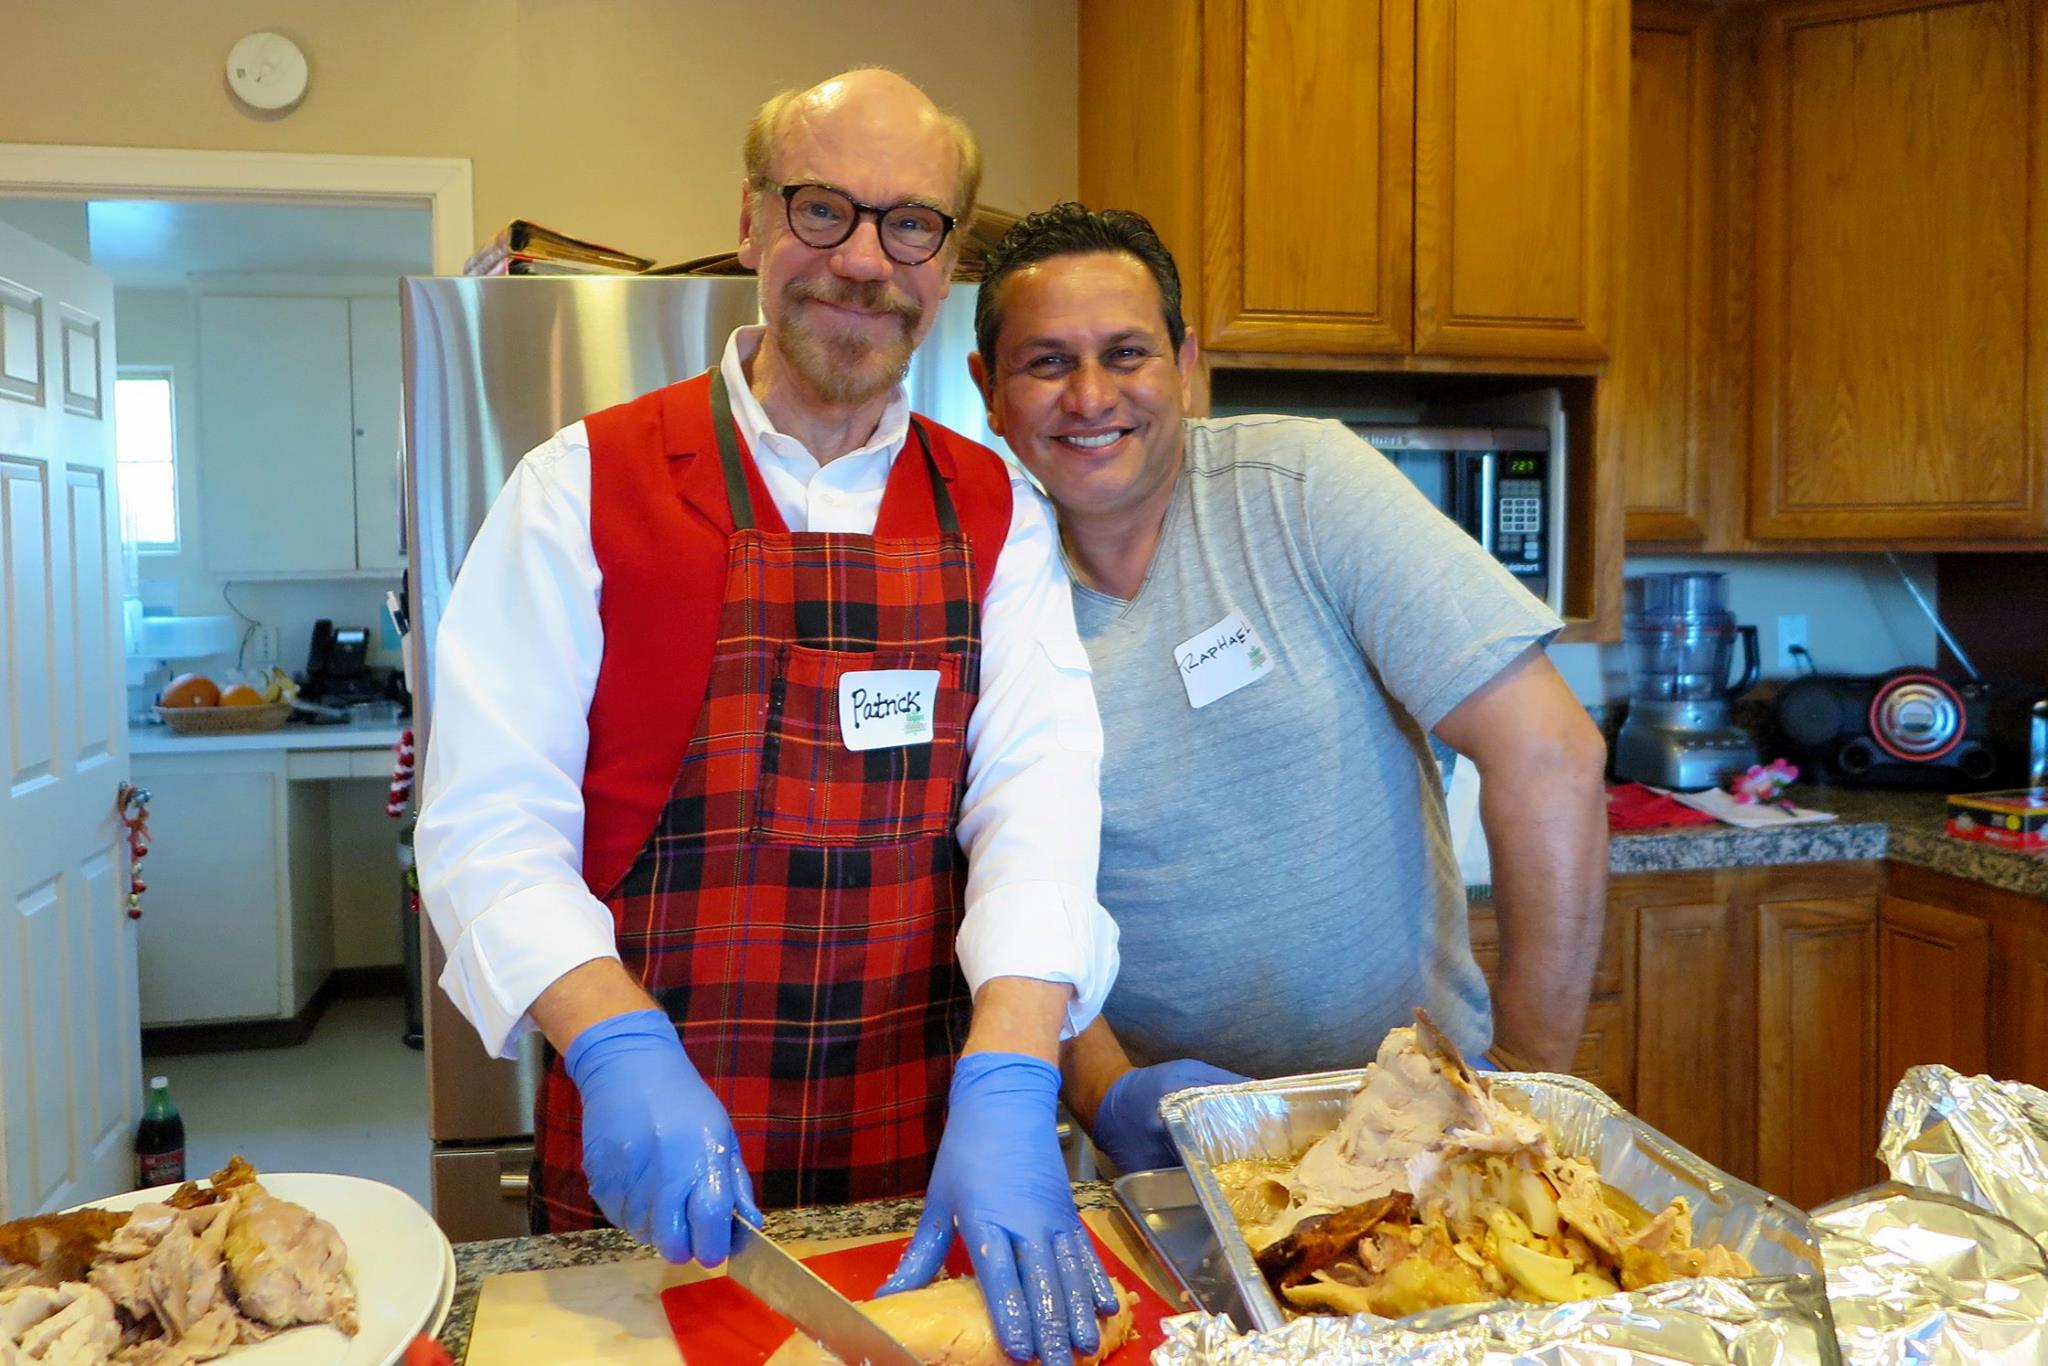 Bring & Serve Dinner for 9 residents at Michaelle House for AIDS/HIV Patients - Thursday Nights